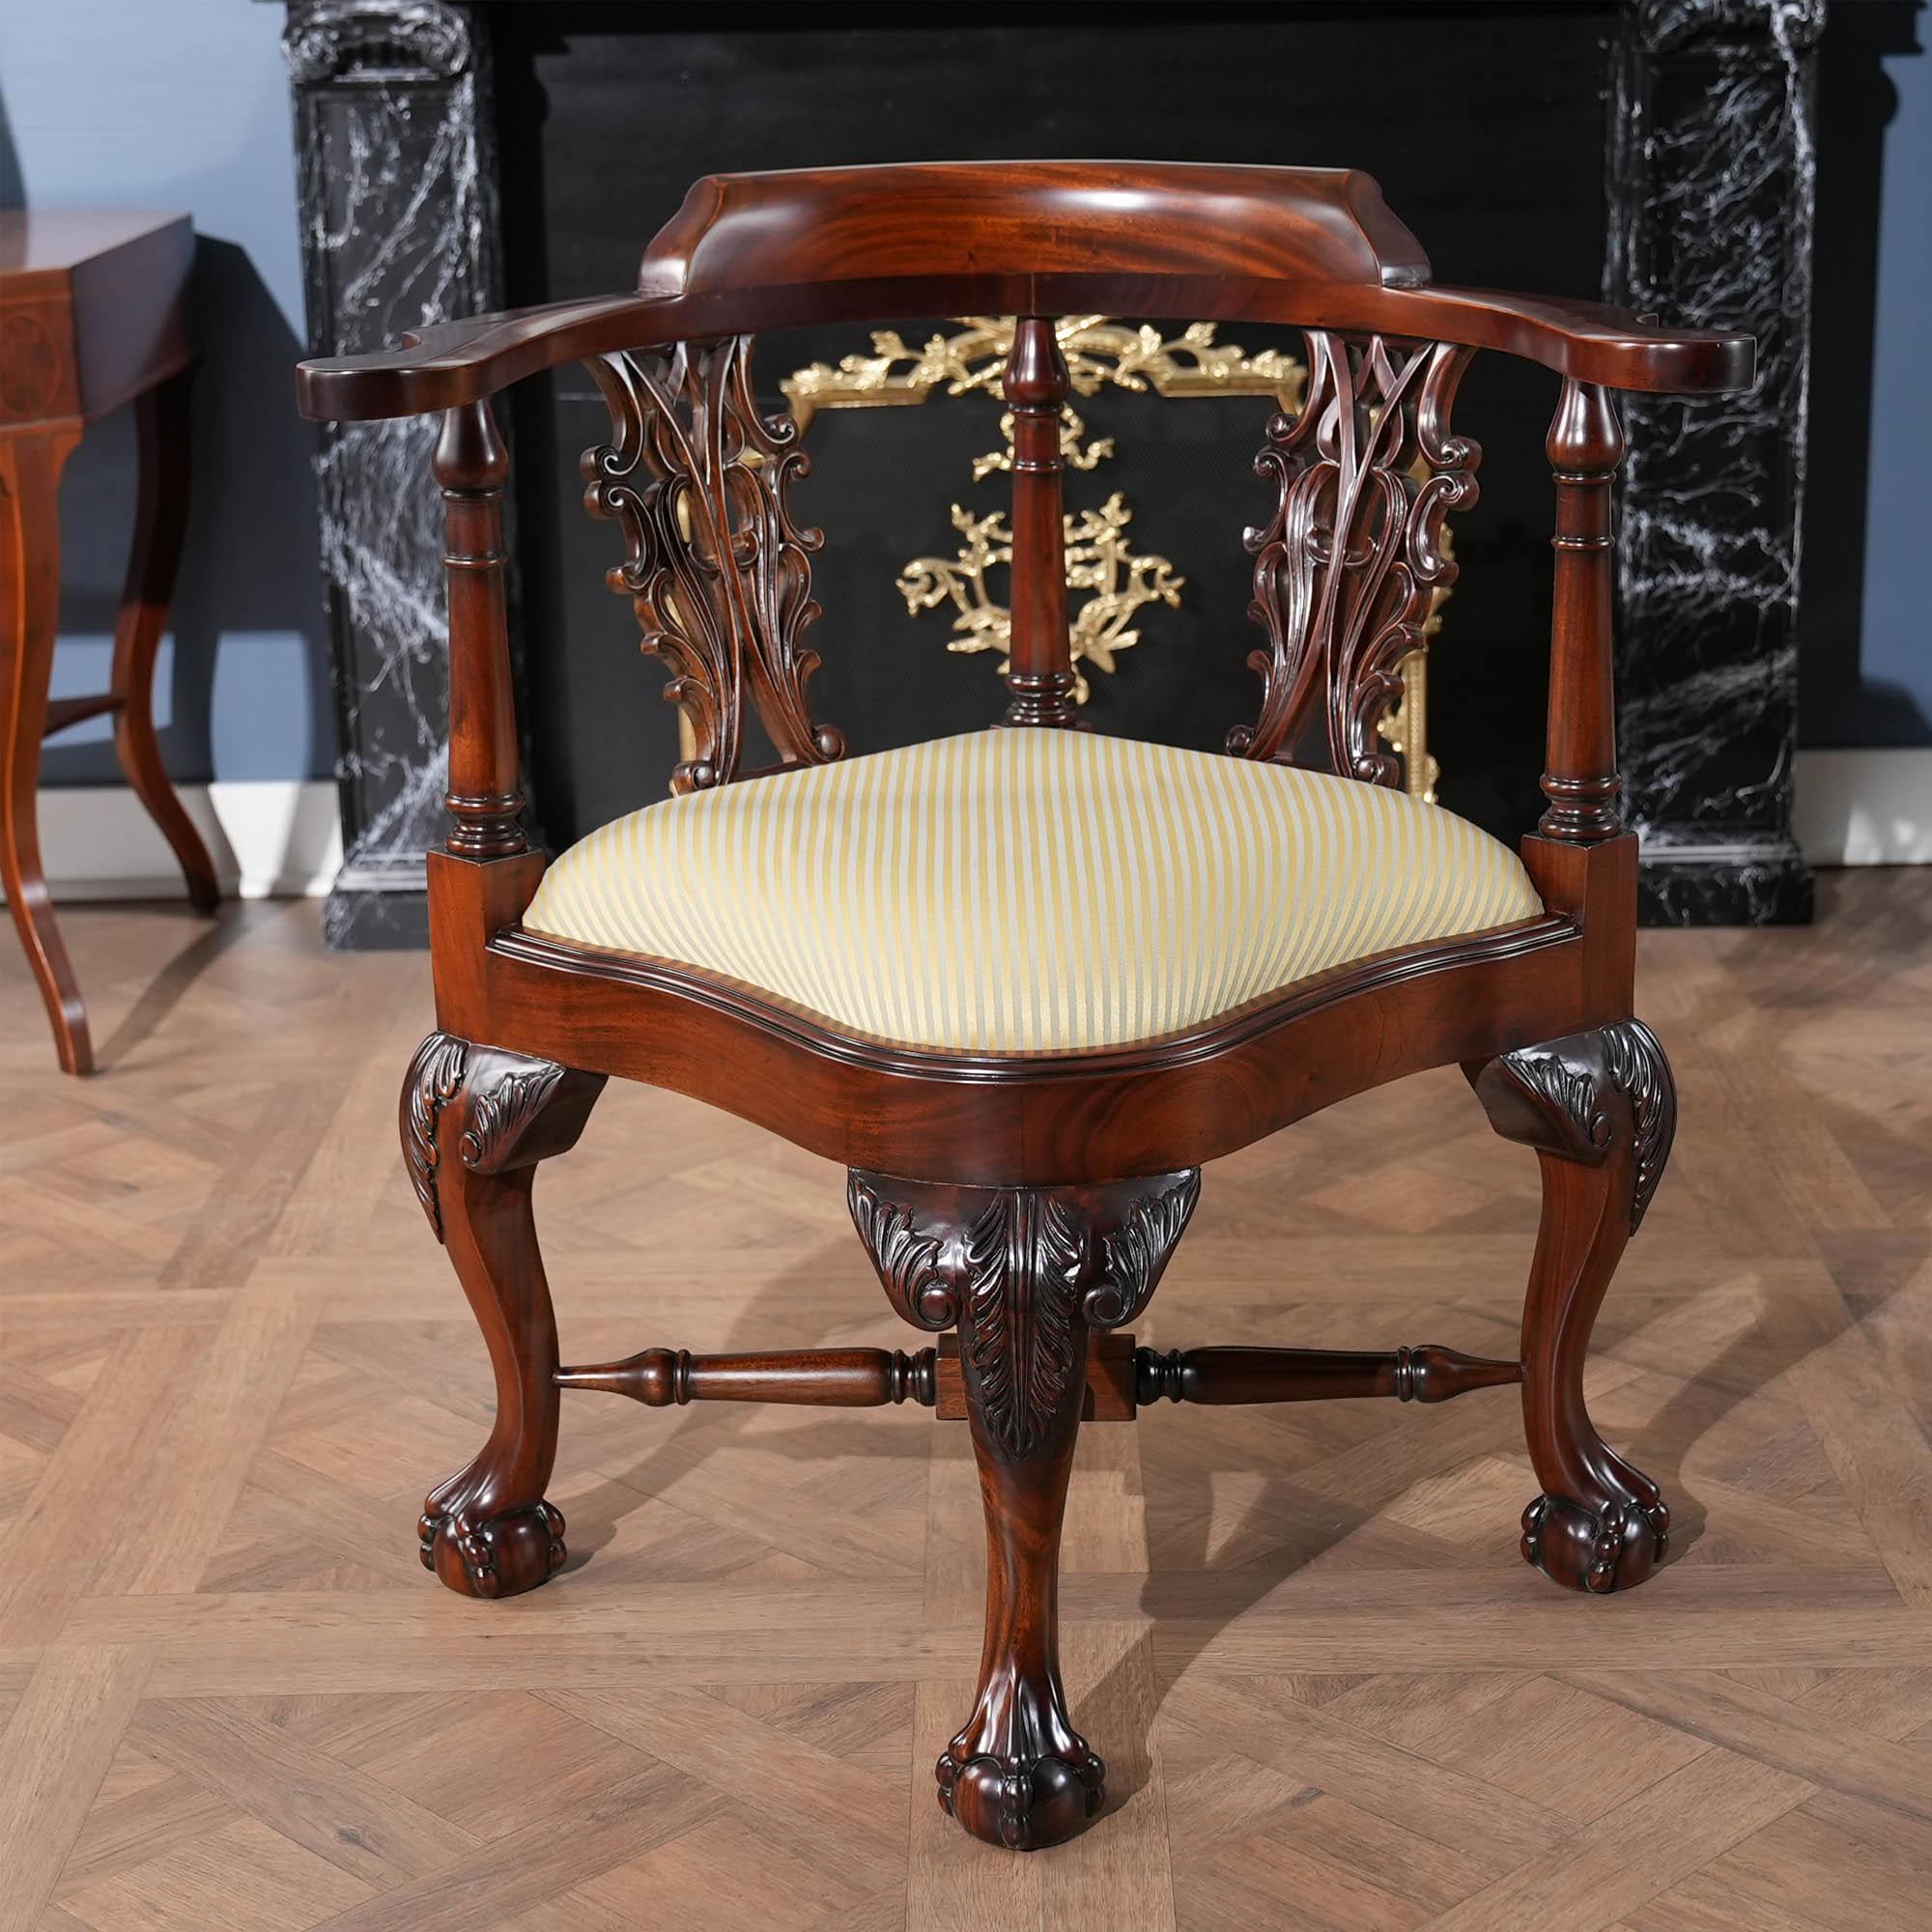 A high quality, hand carved, solid mahogany Large Corner Chair. Our Large Corner Chair features hand carved acanthus leaves on the knees and scrollwork in the back splat all executed by hand using traditional methods in solid mahogany. Standing on